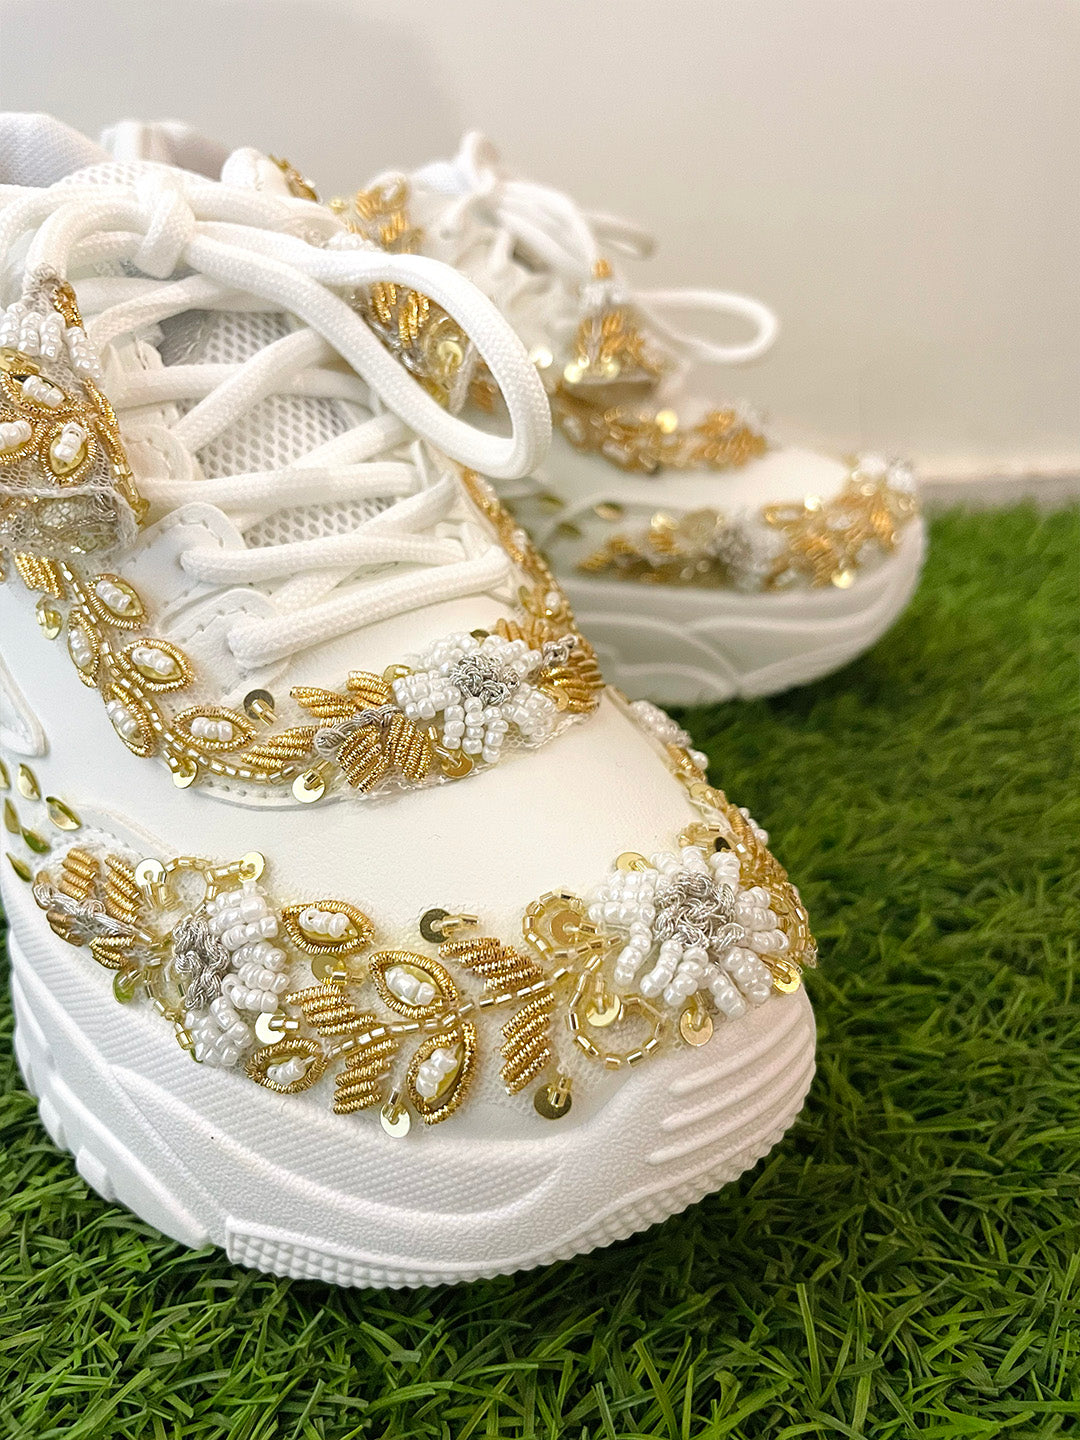 Rhinestone Glitter Sneakers: Stretch Mesh Trainers With Crystals For Men  And Women From Luxuryshoeshop199, $52.18 | DHgate.Com